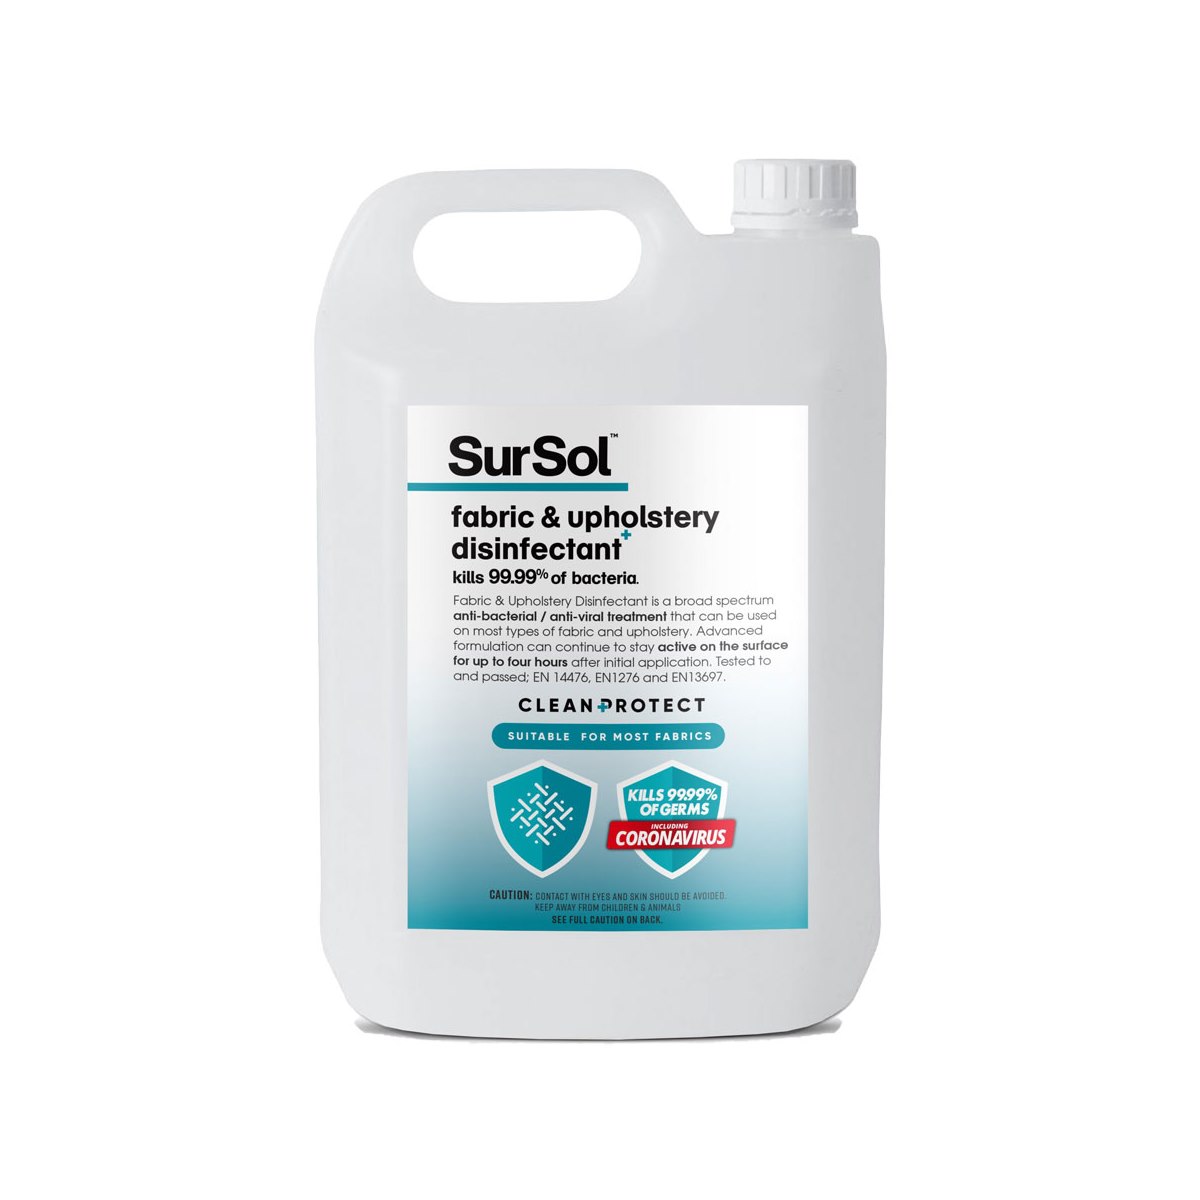 SurSol Fabric and Upholstery Disinfectant Spray 5 Litre